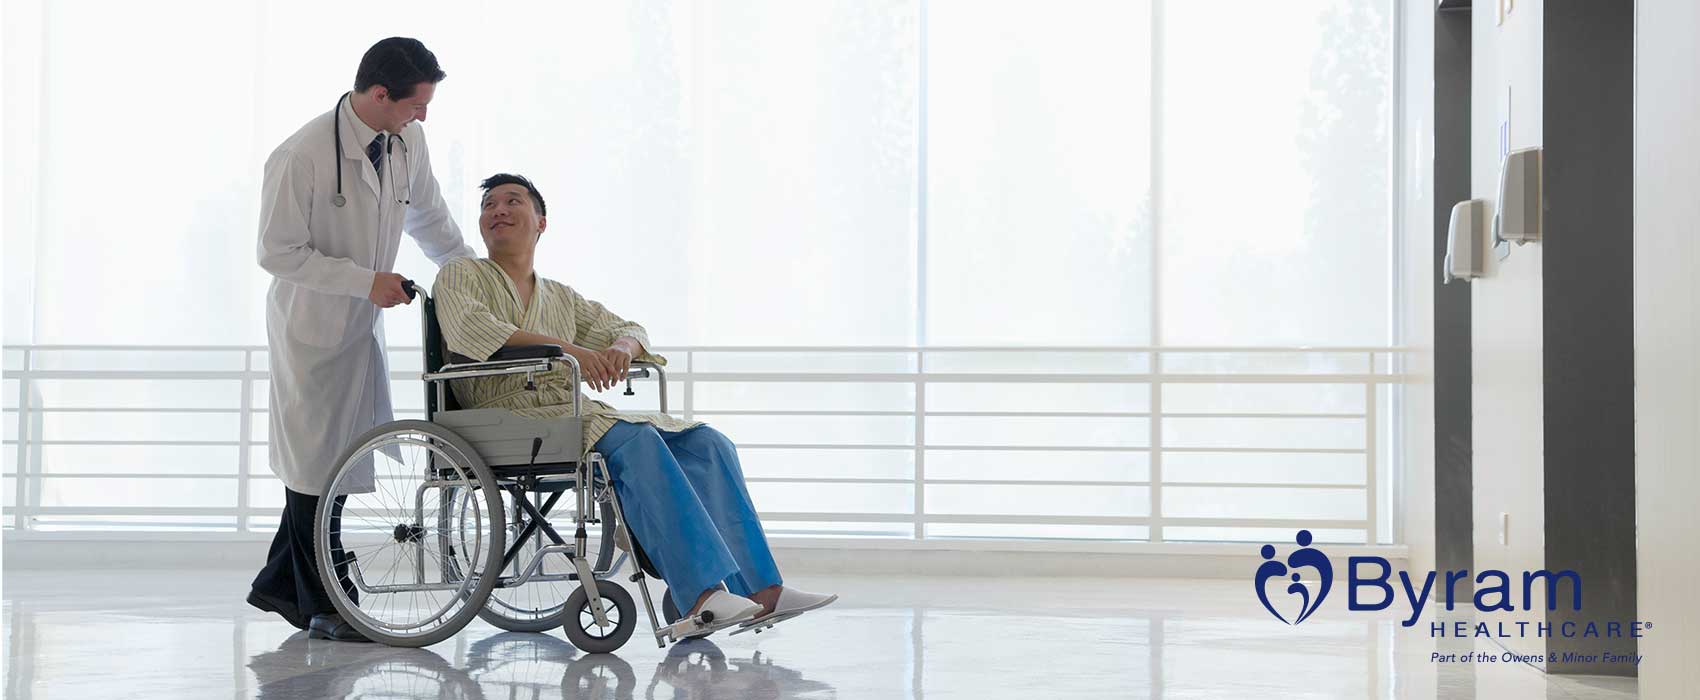 Nurse pushing patient in a wheelchair after surgery.